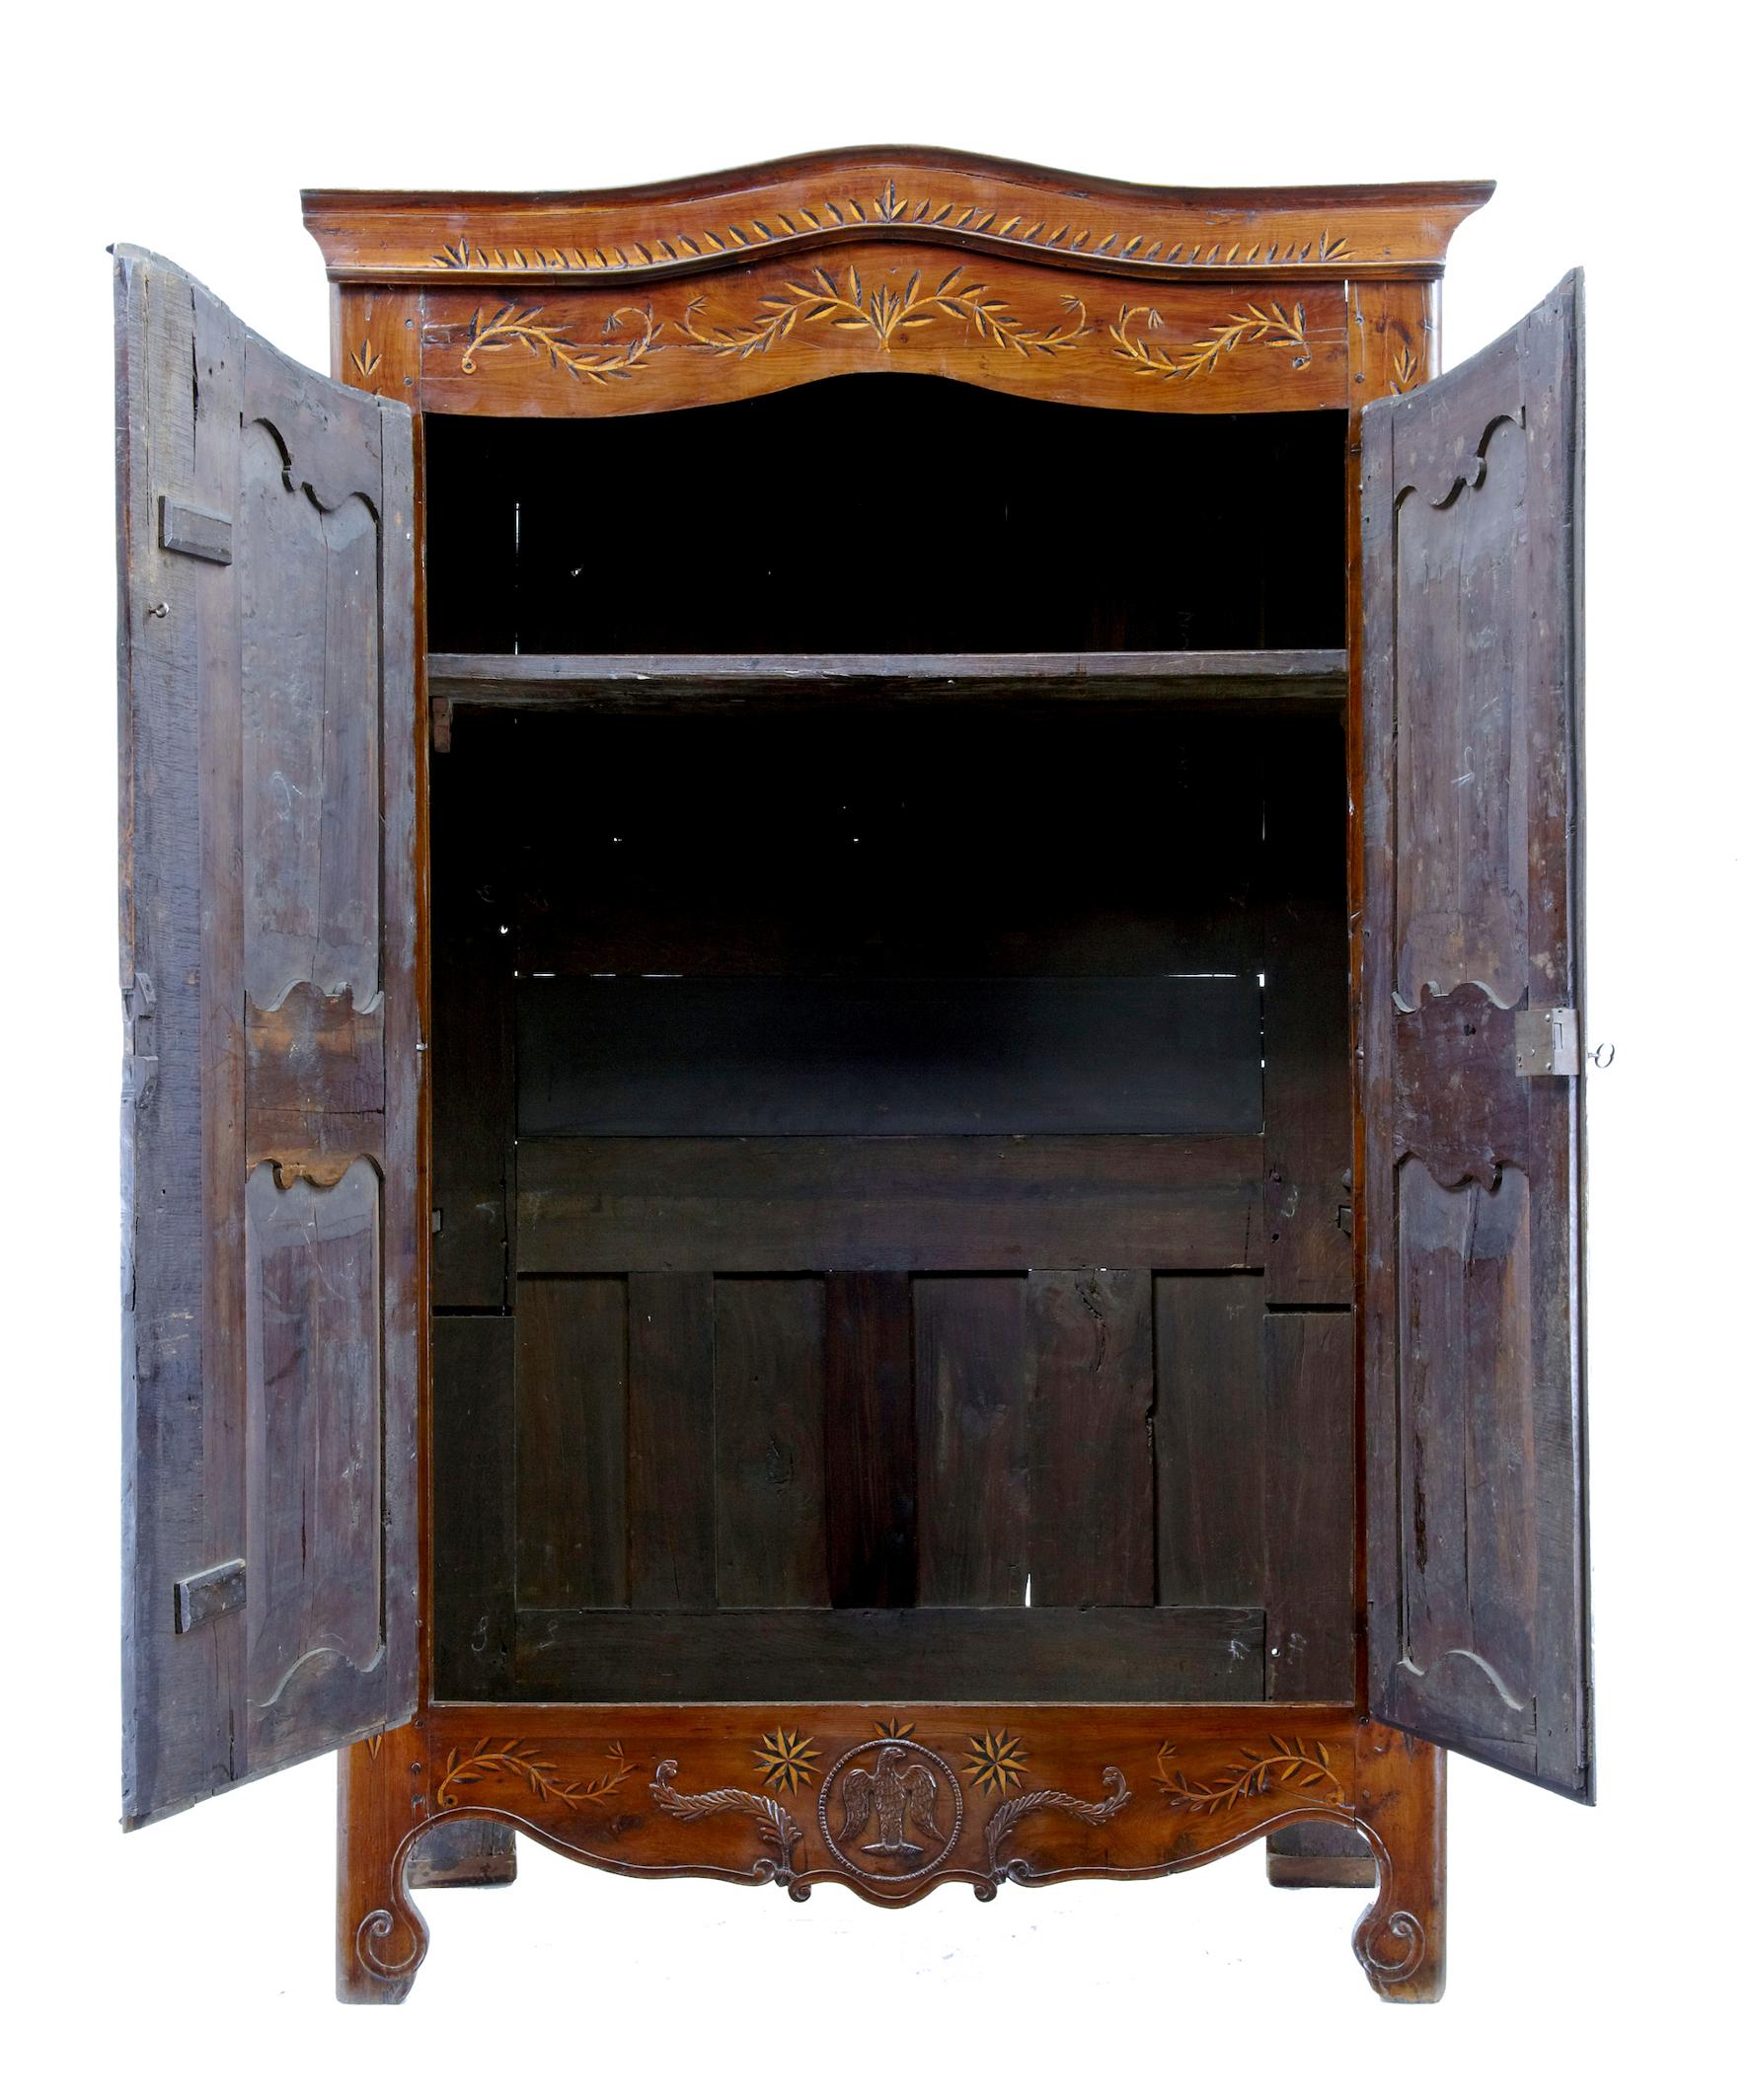 This sort of armoire is also known as a marriage armoire.

Cornice and front are profusely inlaid with a leaf design, with a snake flowing up the middle of the doors, with pierced metal escutheon plate. Rare addition to this piece is a carved